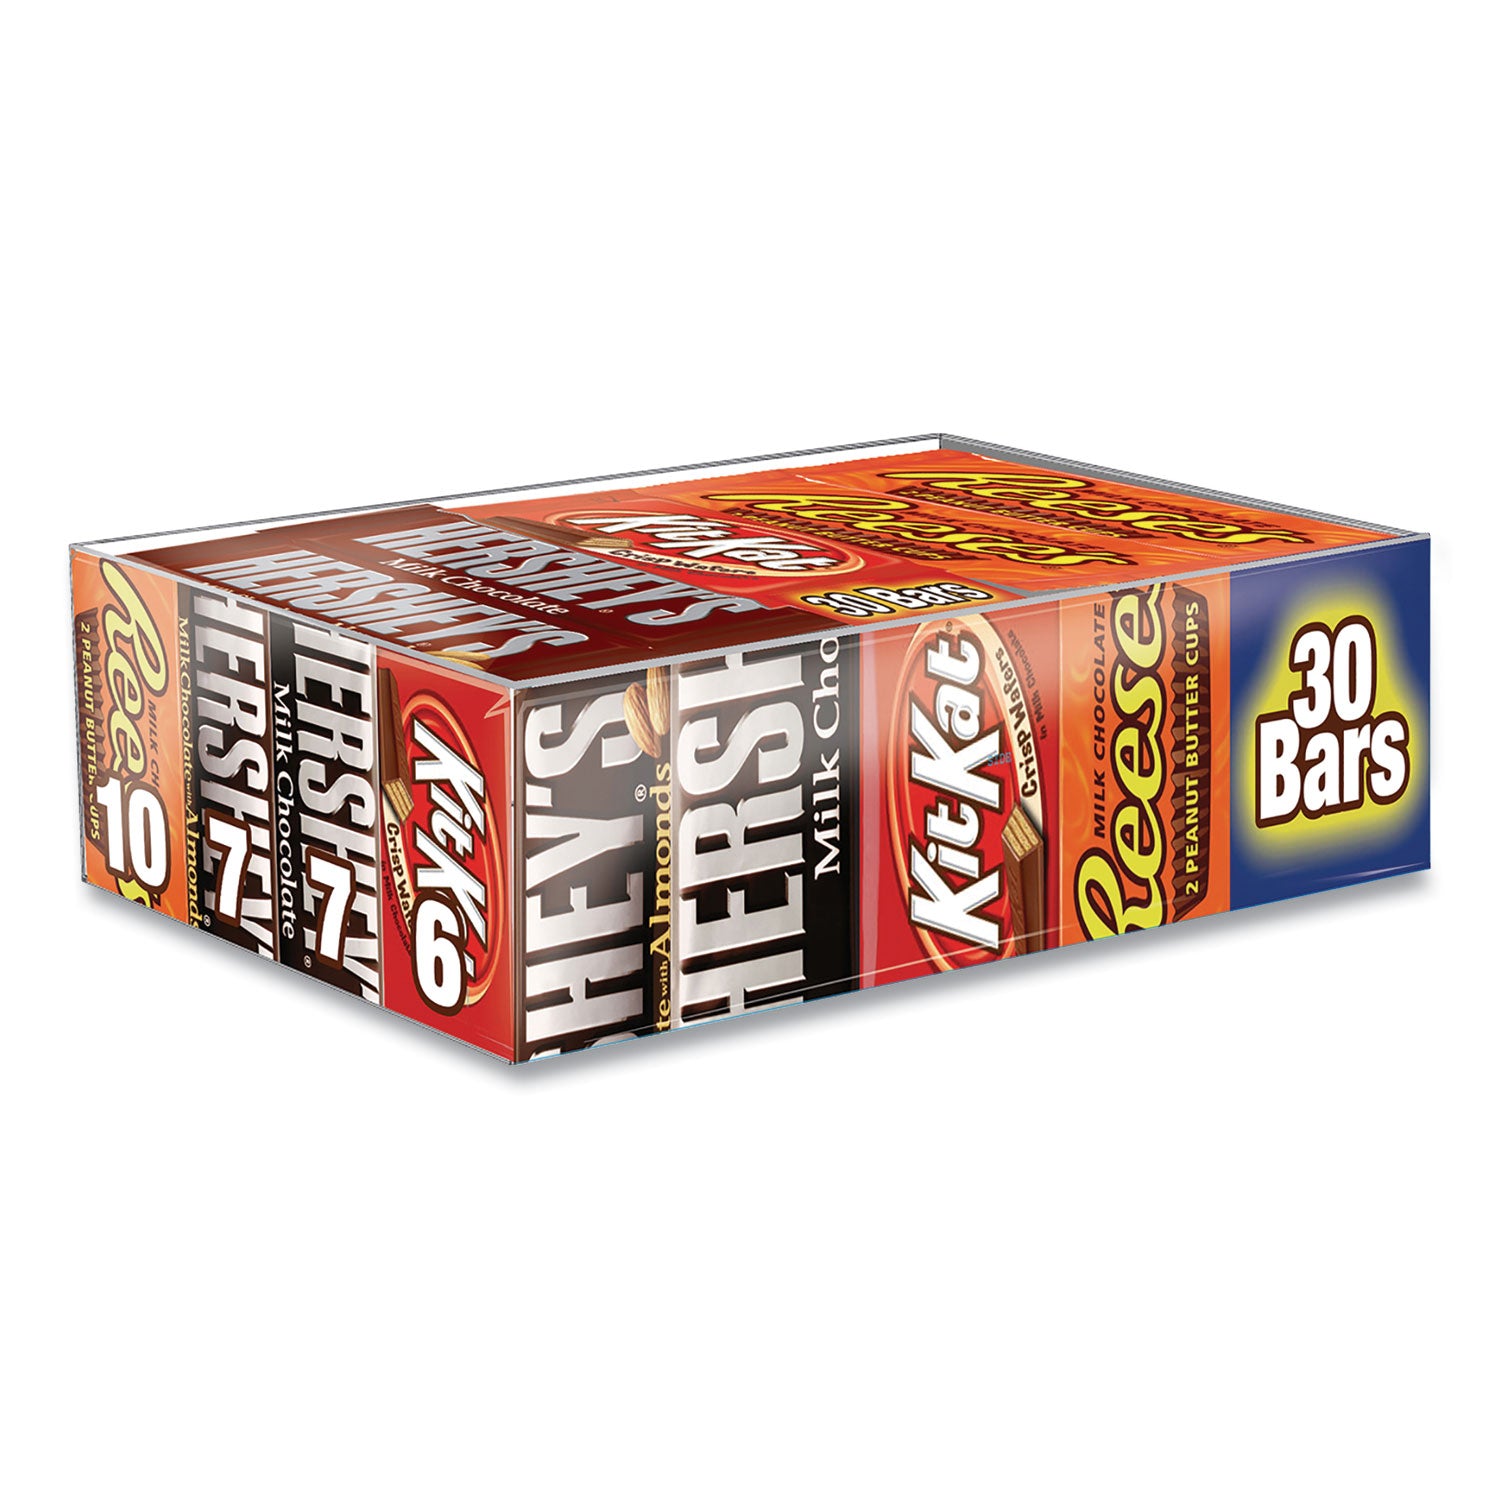 full-size-chocolate-candy-bar-variety-pack-assorted-15-oz-bar-30-bars-box-ships-in-1-3-business-days_grr24600031 - 1